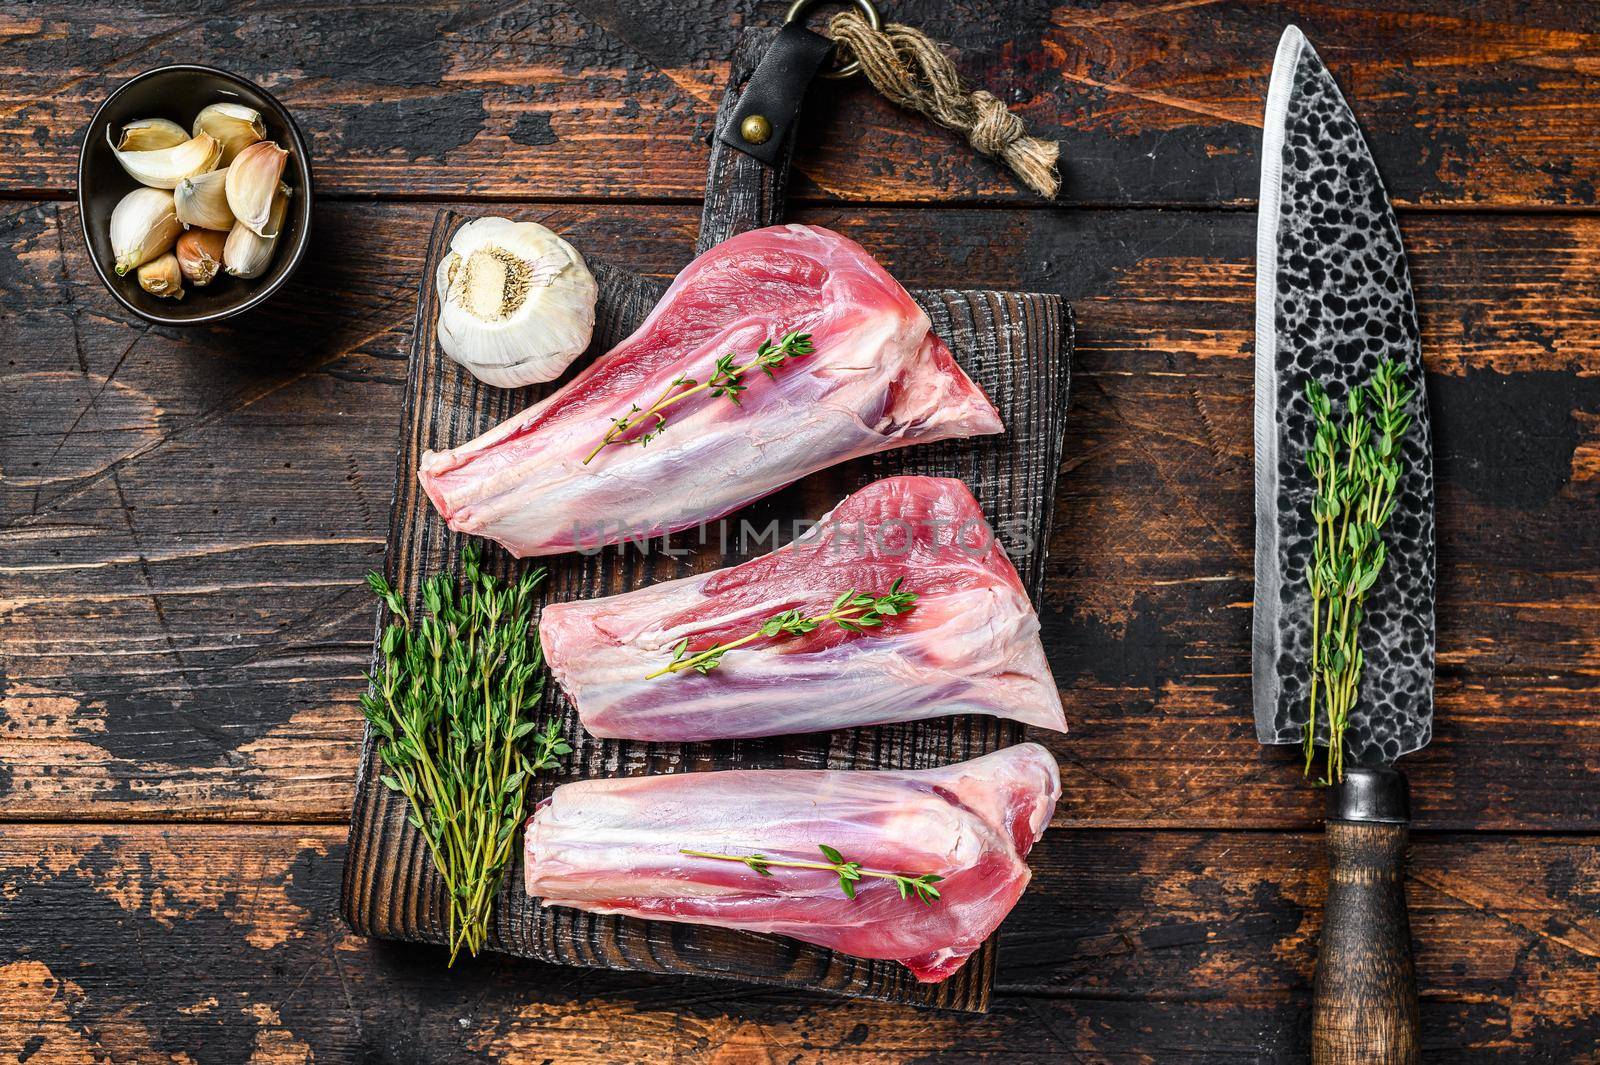 Raw lamb shanks meat on a cutting board with herbs. Dark wooden background. Top view by Composter